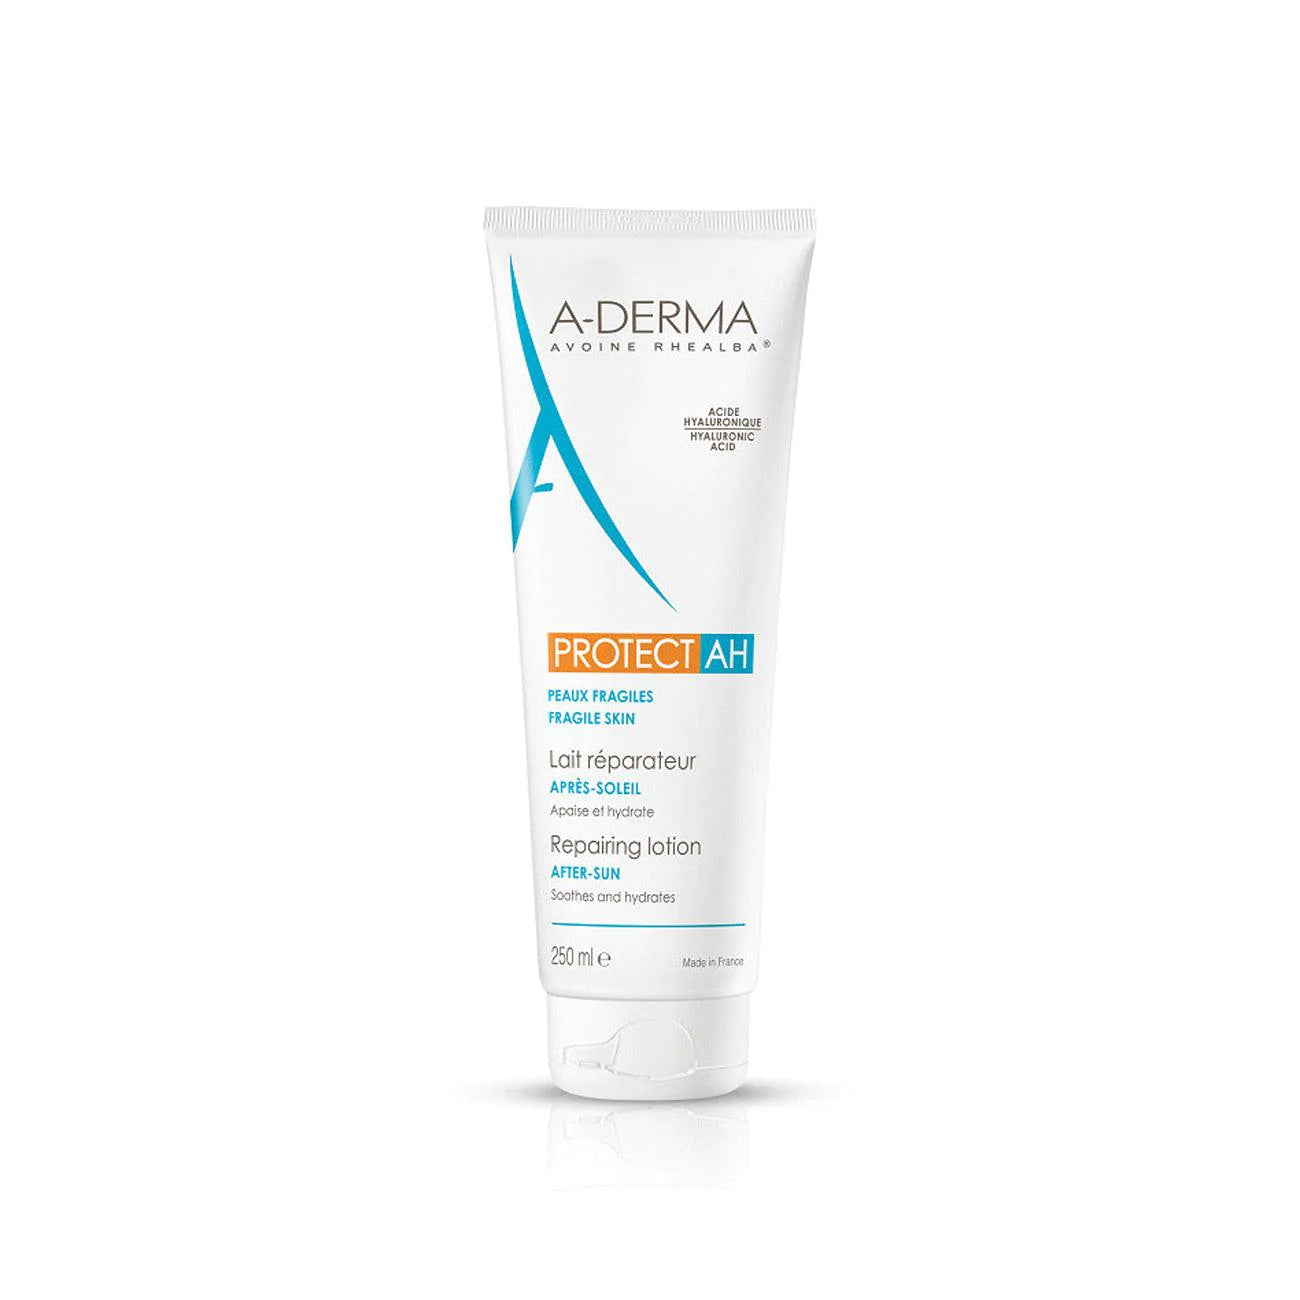 ADERMA After-Sun Lotion